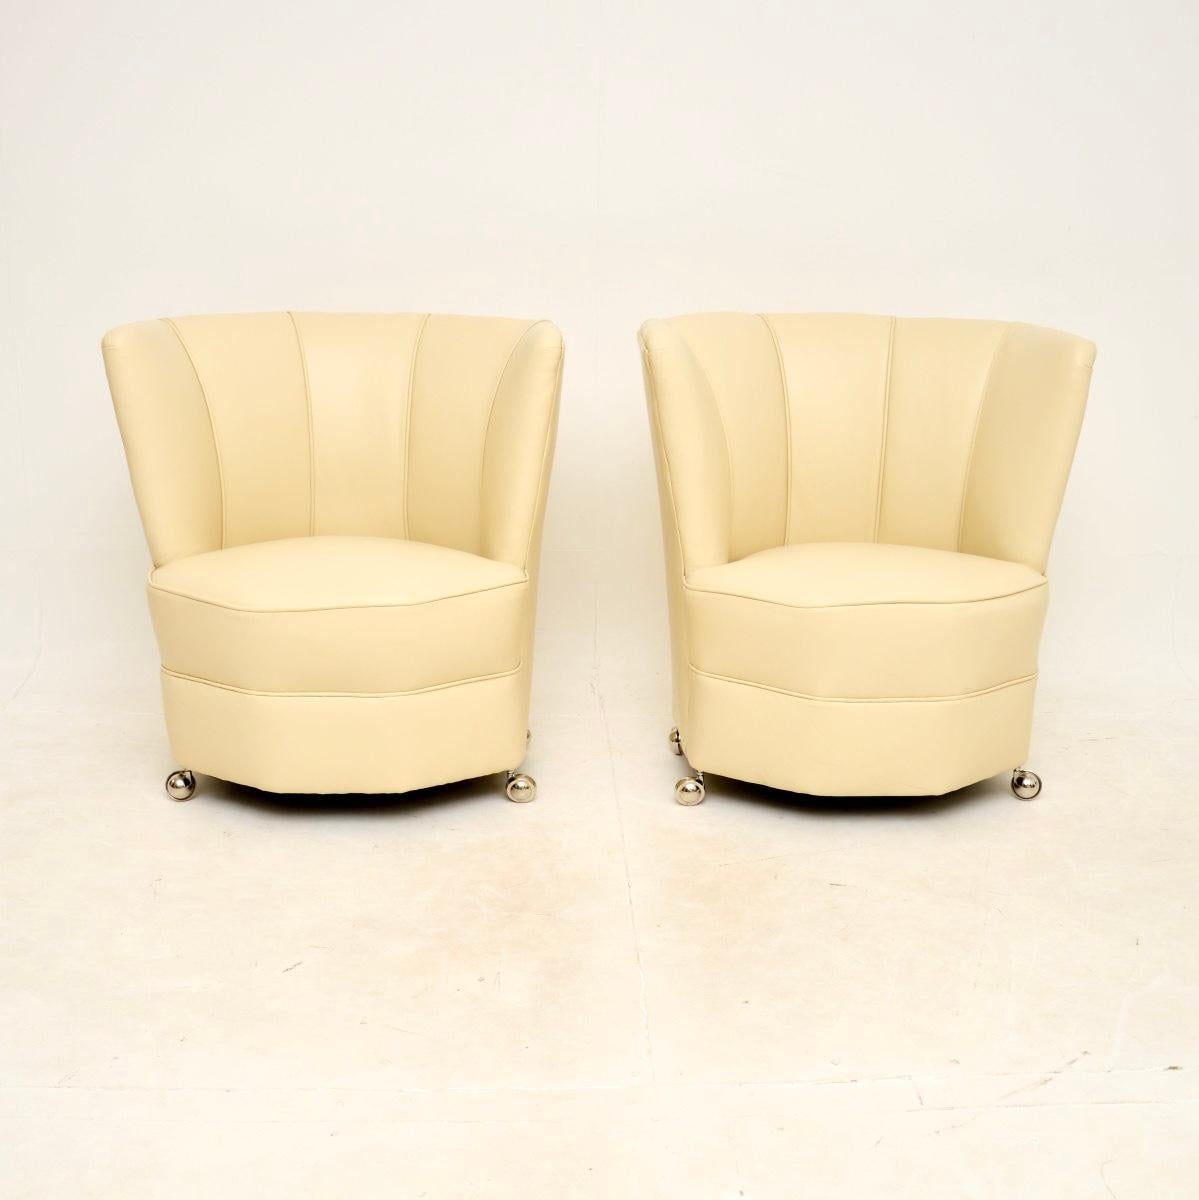 A stunning pair of leather Art Deco armchairs, made in England and dating from the 1920-30’s.

They are of amazing quality and are a lovely, petite size. They would be perfect as bedroom chairs are occasional side chairs in various settings around